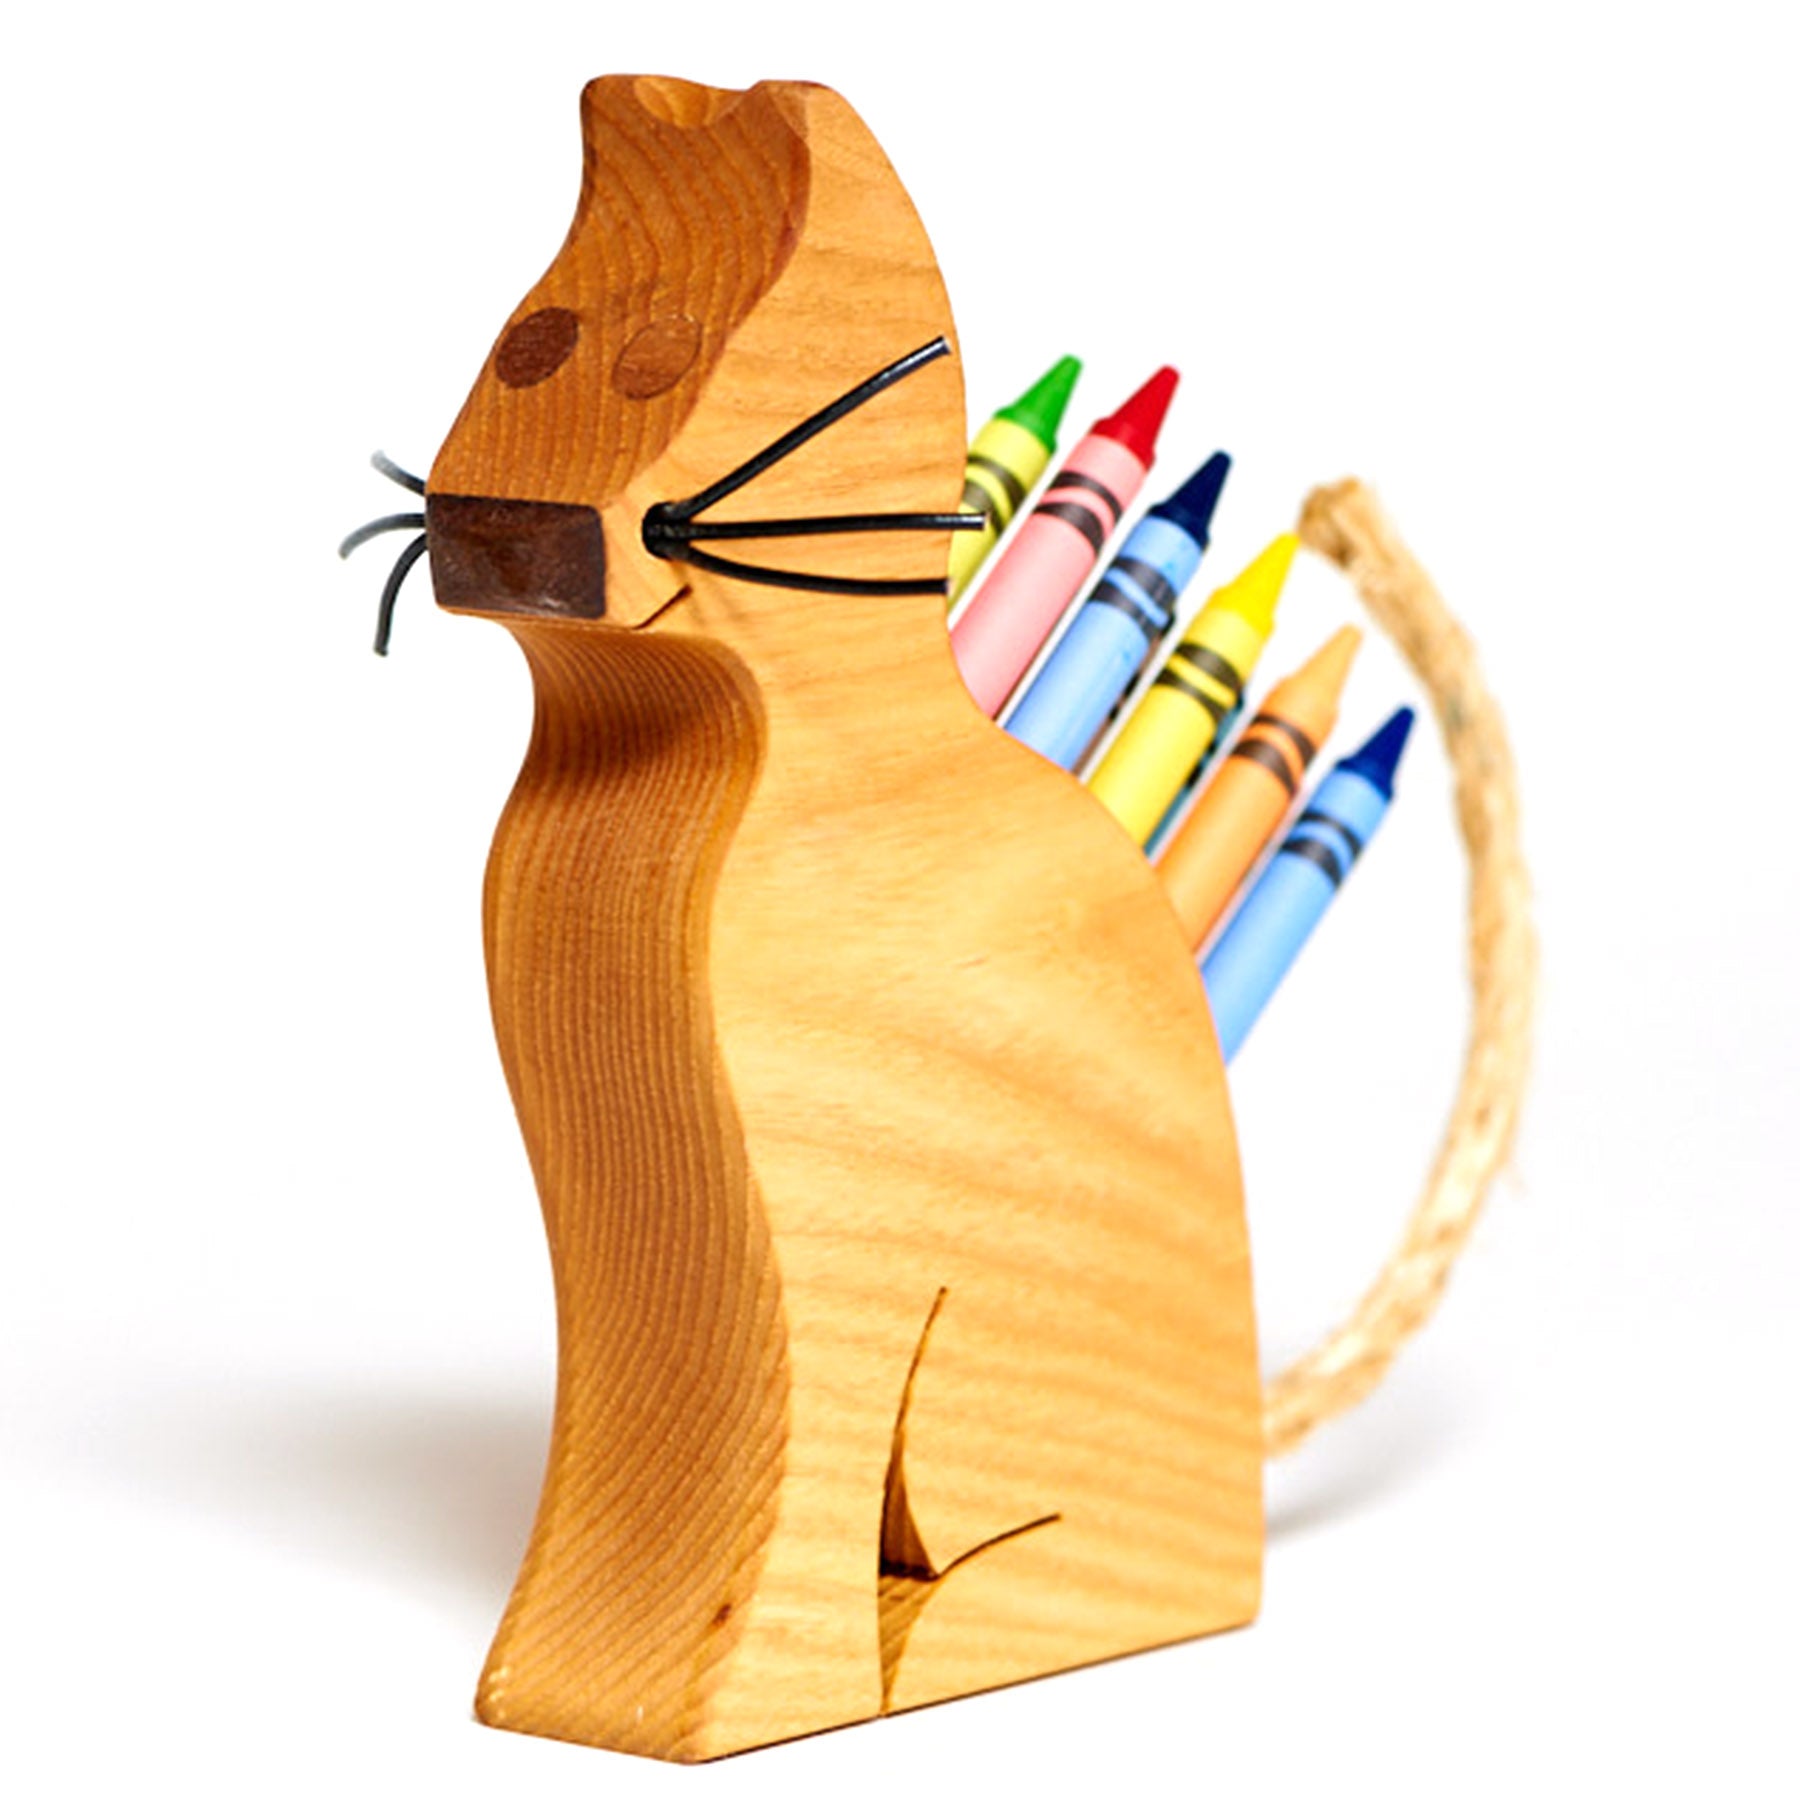 PORTE-CRAYONS CHAT